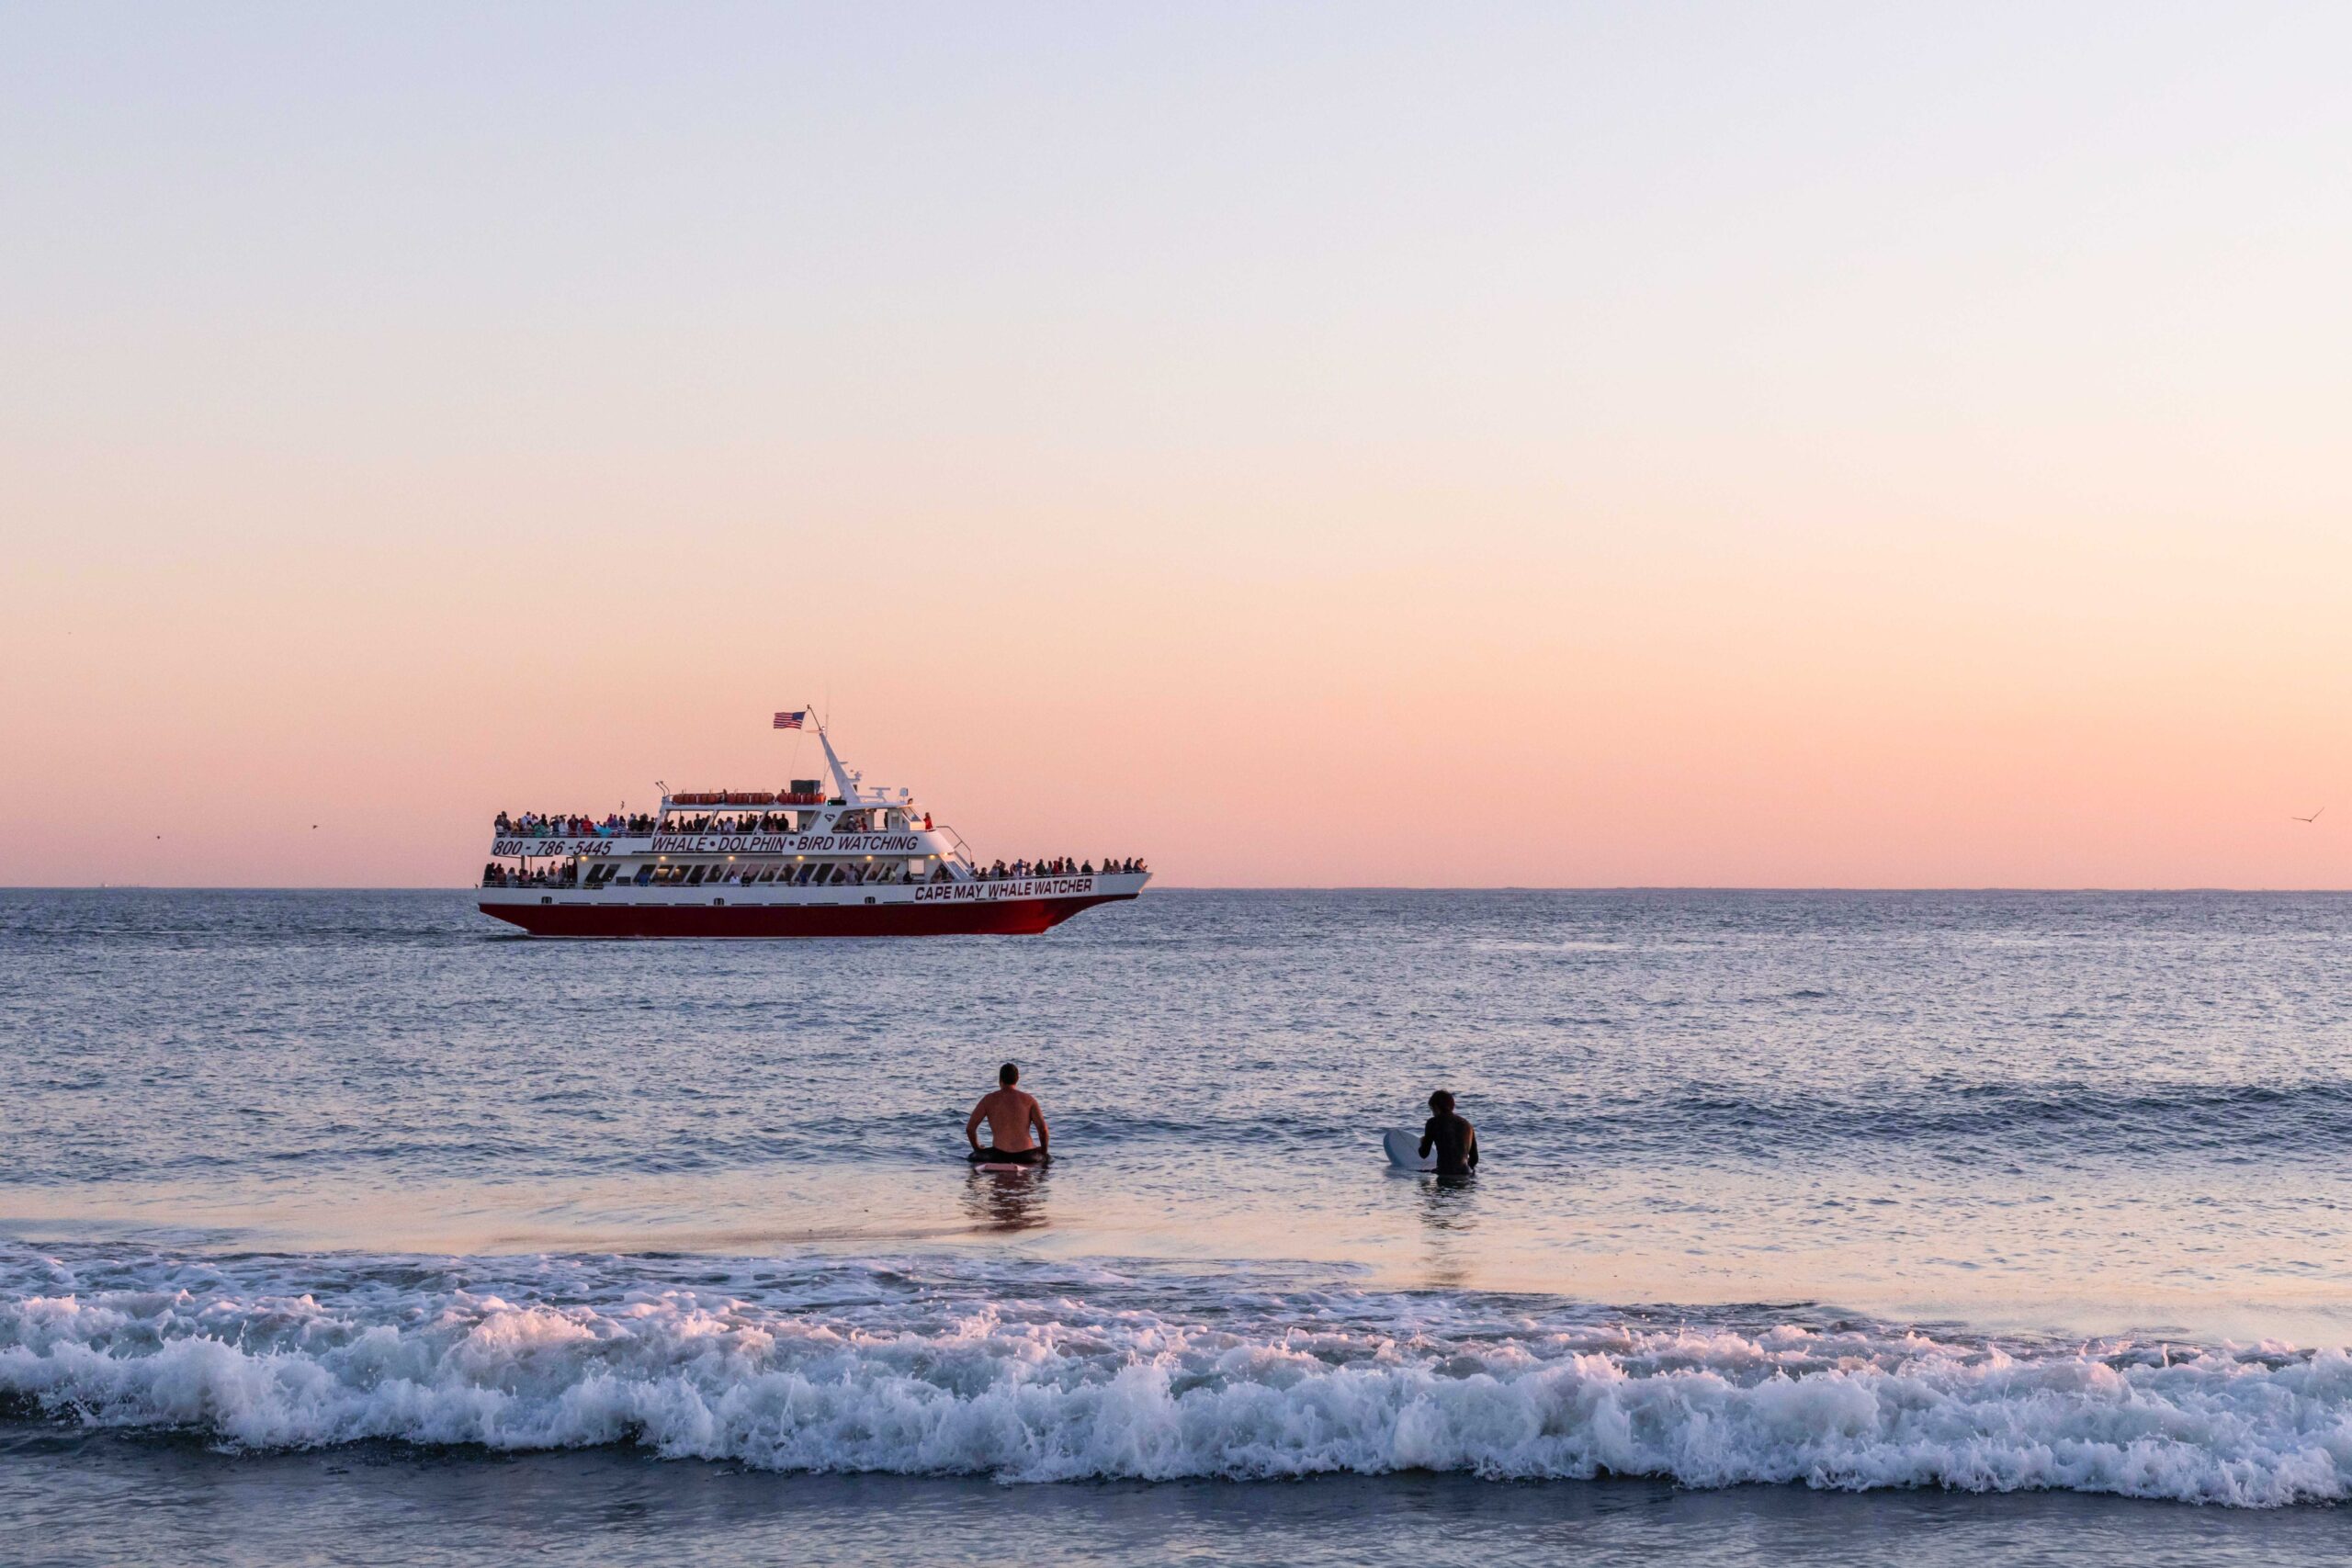 Two people sitting on surfboards in the ocean watching the Cape May Whale Watching boat sail past at sunset